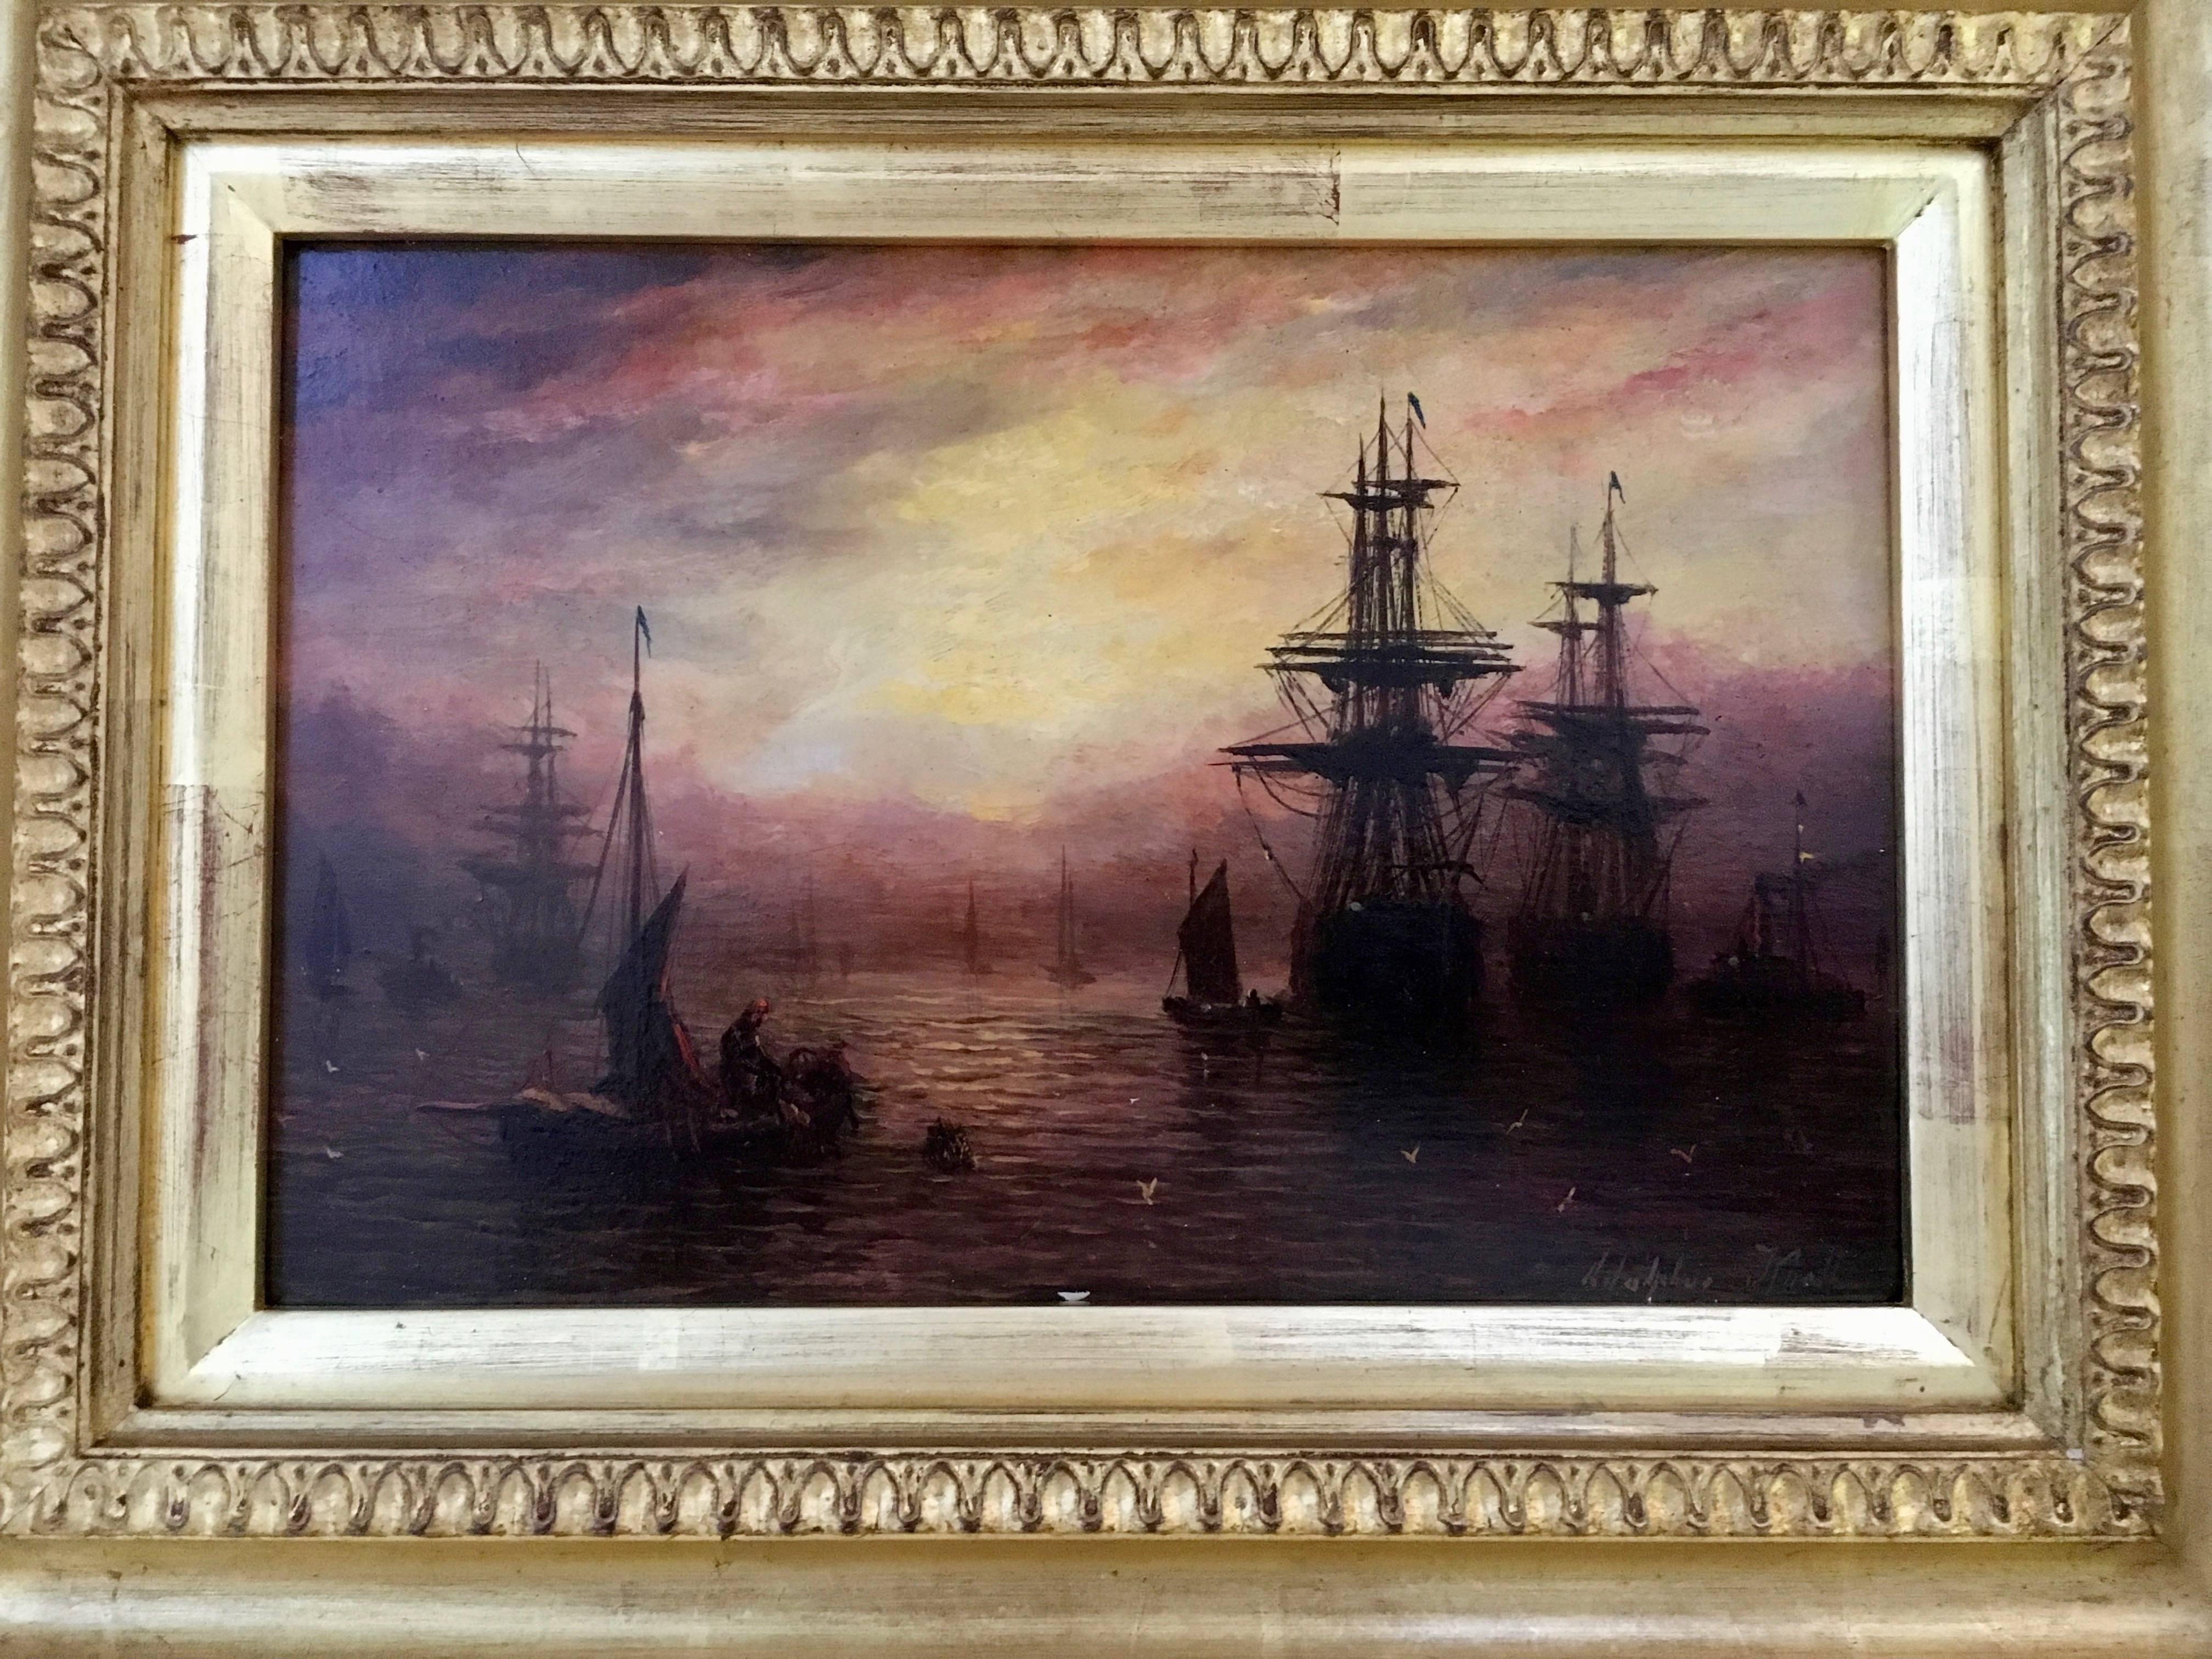 English marine scene during early evening with the Sun setting - Victorian Painting by Adolphus Knell